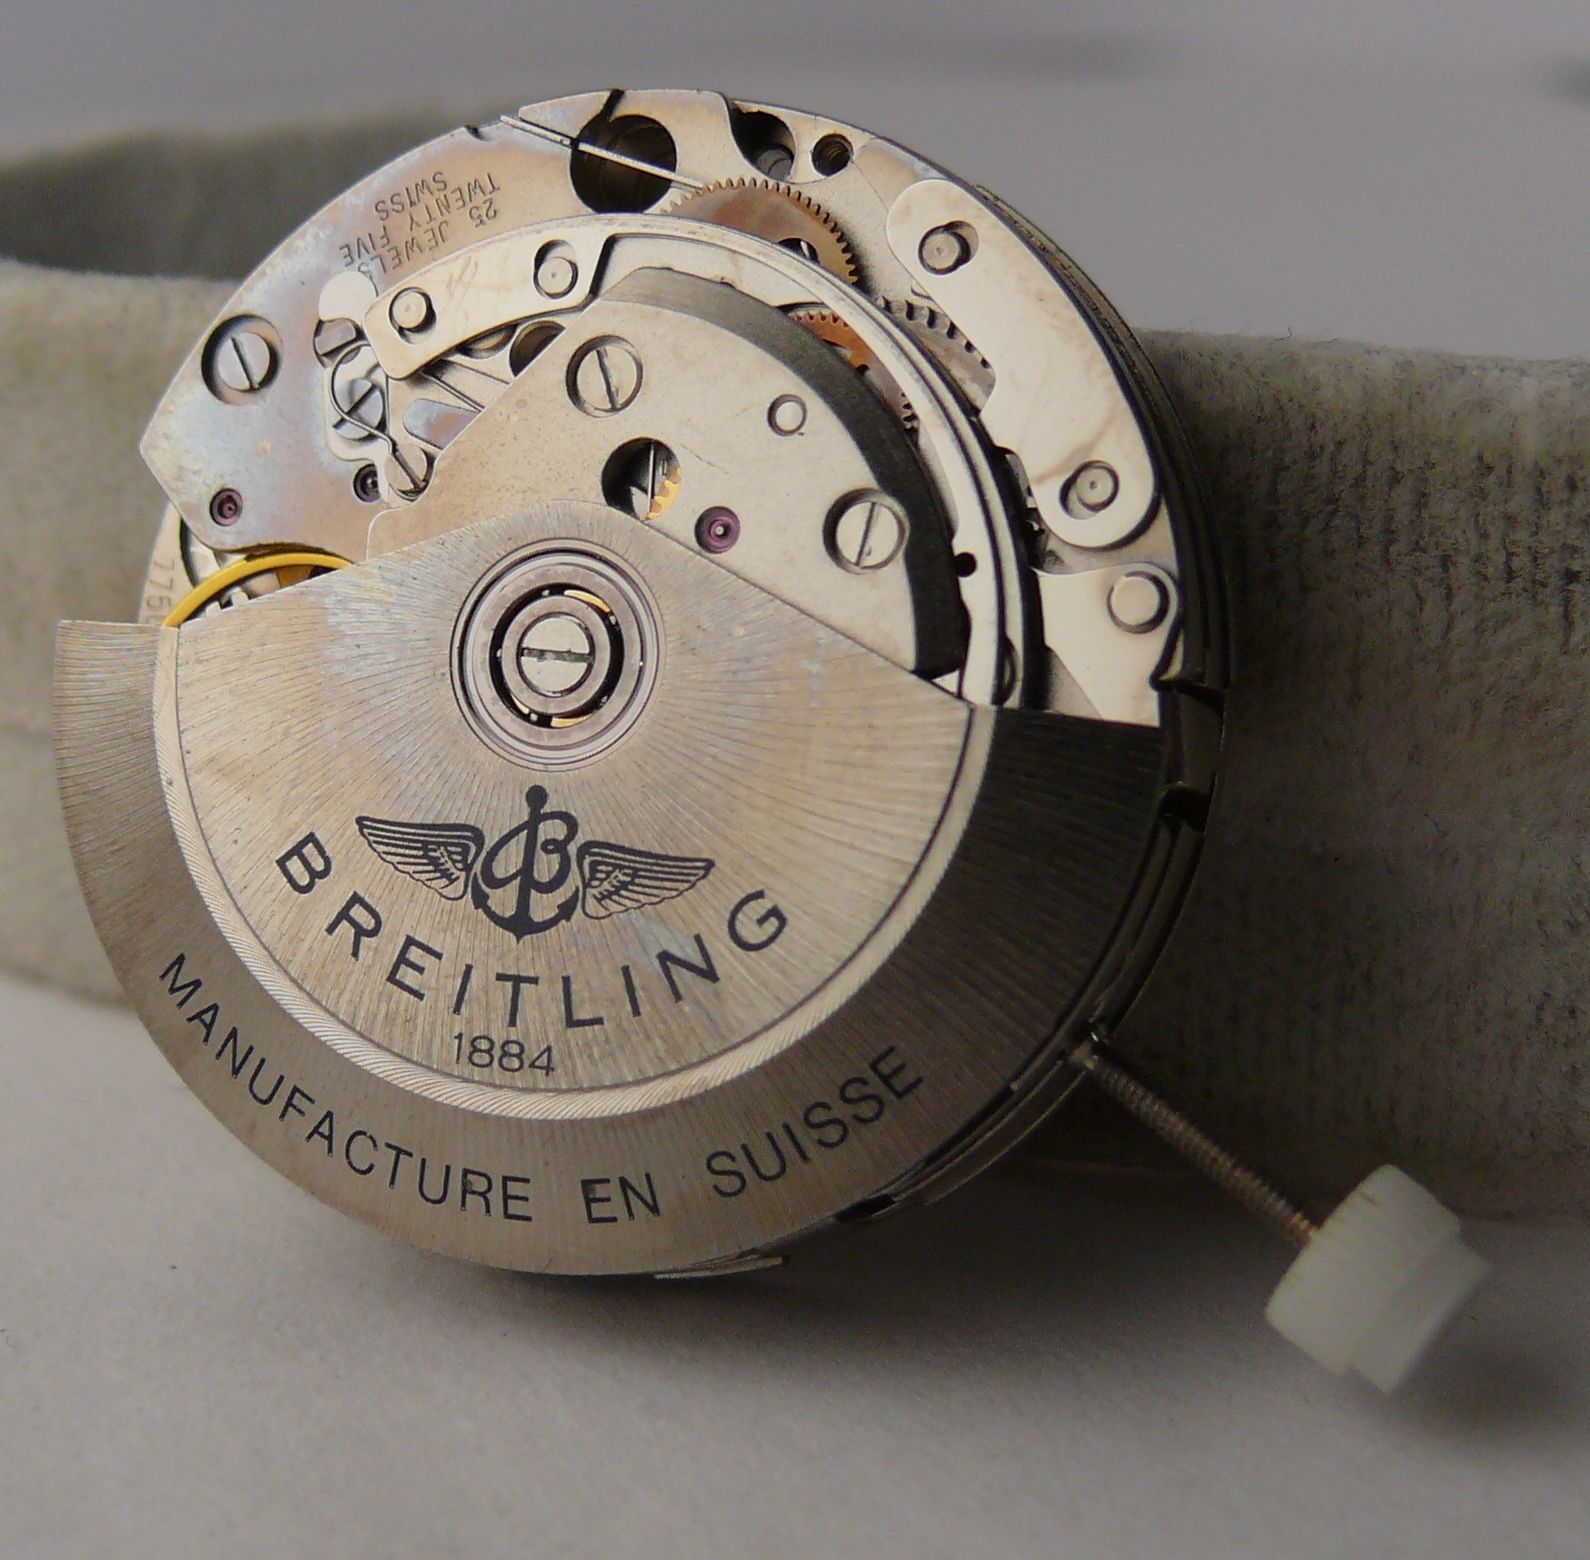 Vintage Breitling Chronograph Valjoux 7750 Movement. Although recent service history is unknown, - Image 3 of 4